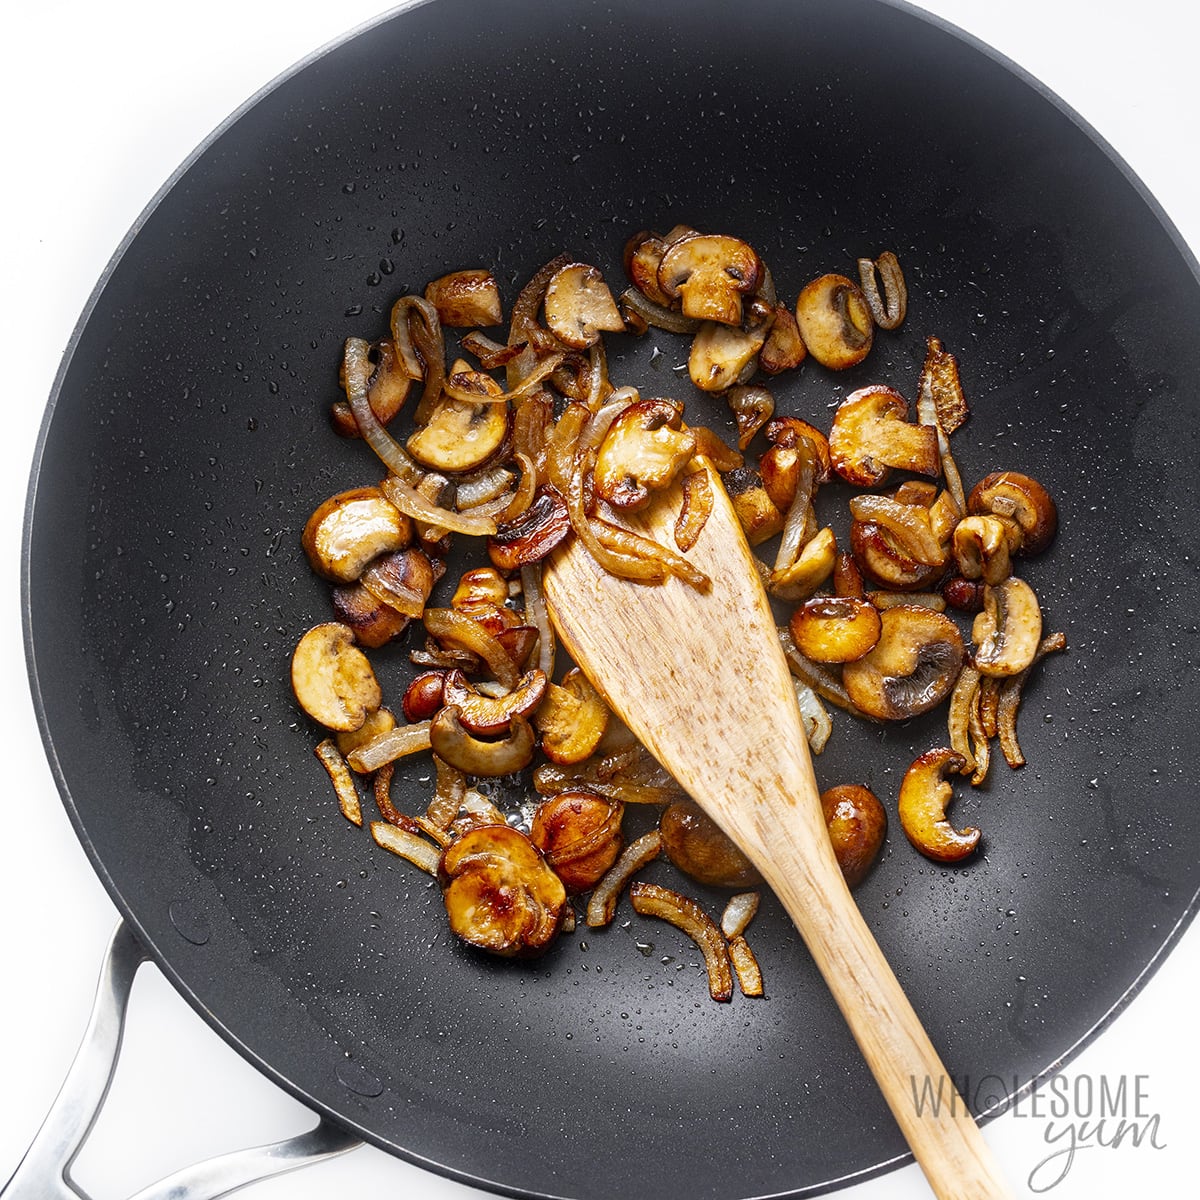 Mushrooms and onions sauteed in wok.